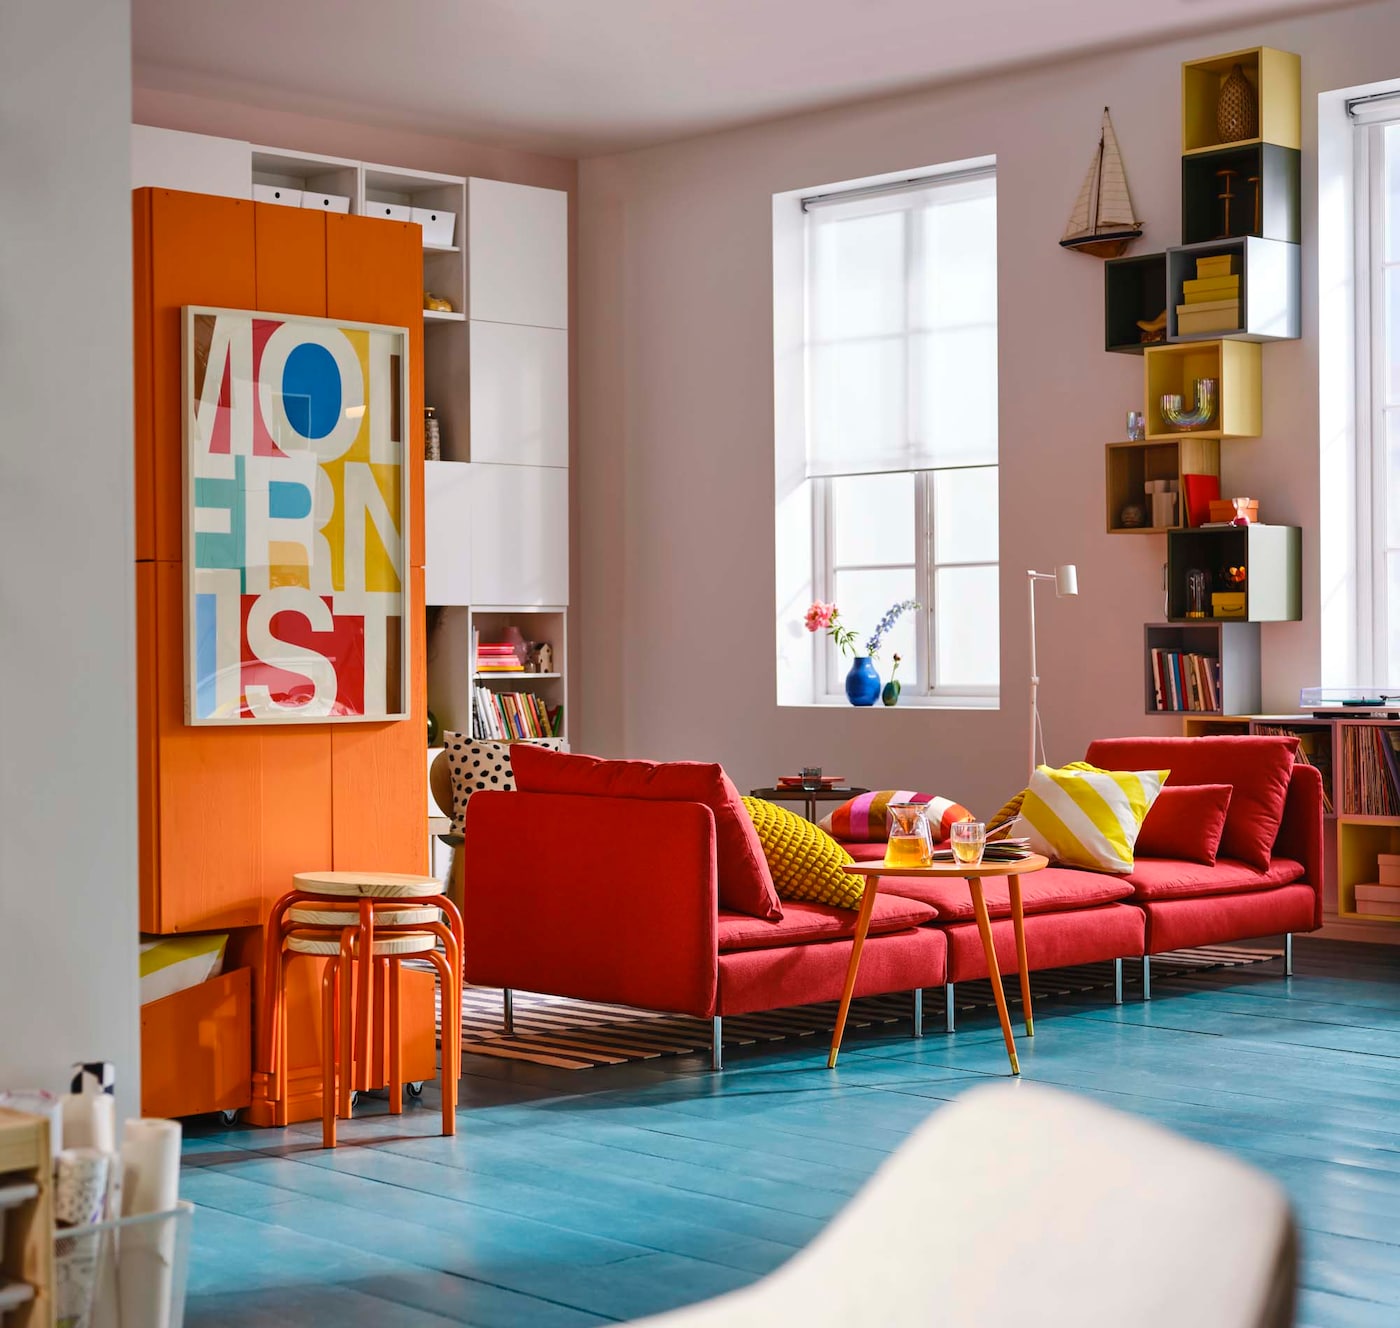 A room with a blue floor. Orange cupboards and stools stand alongside a red modular sofa.